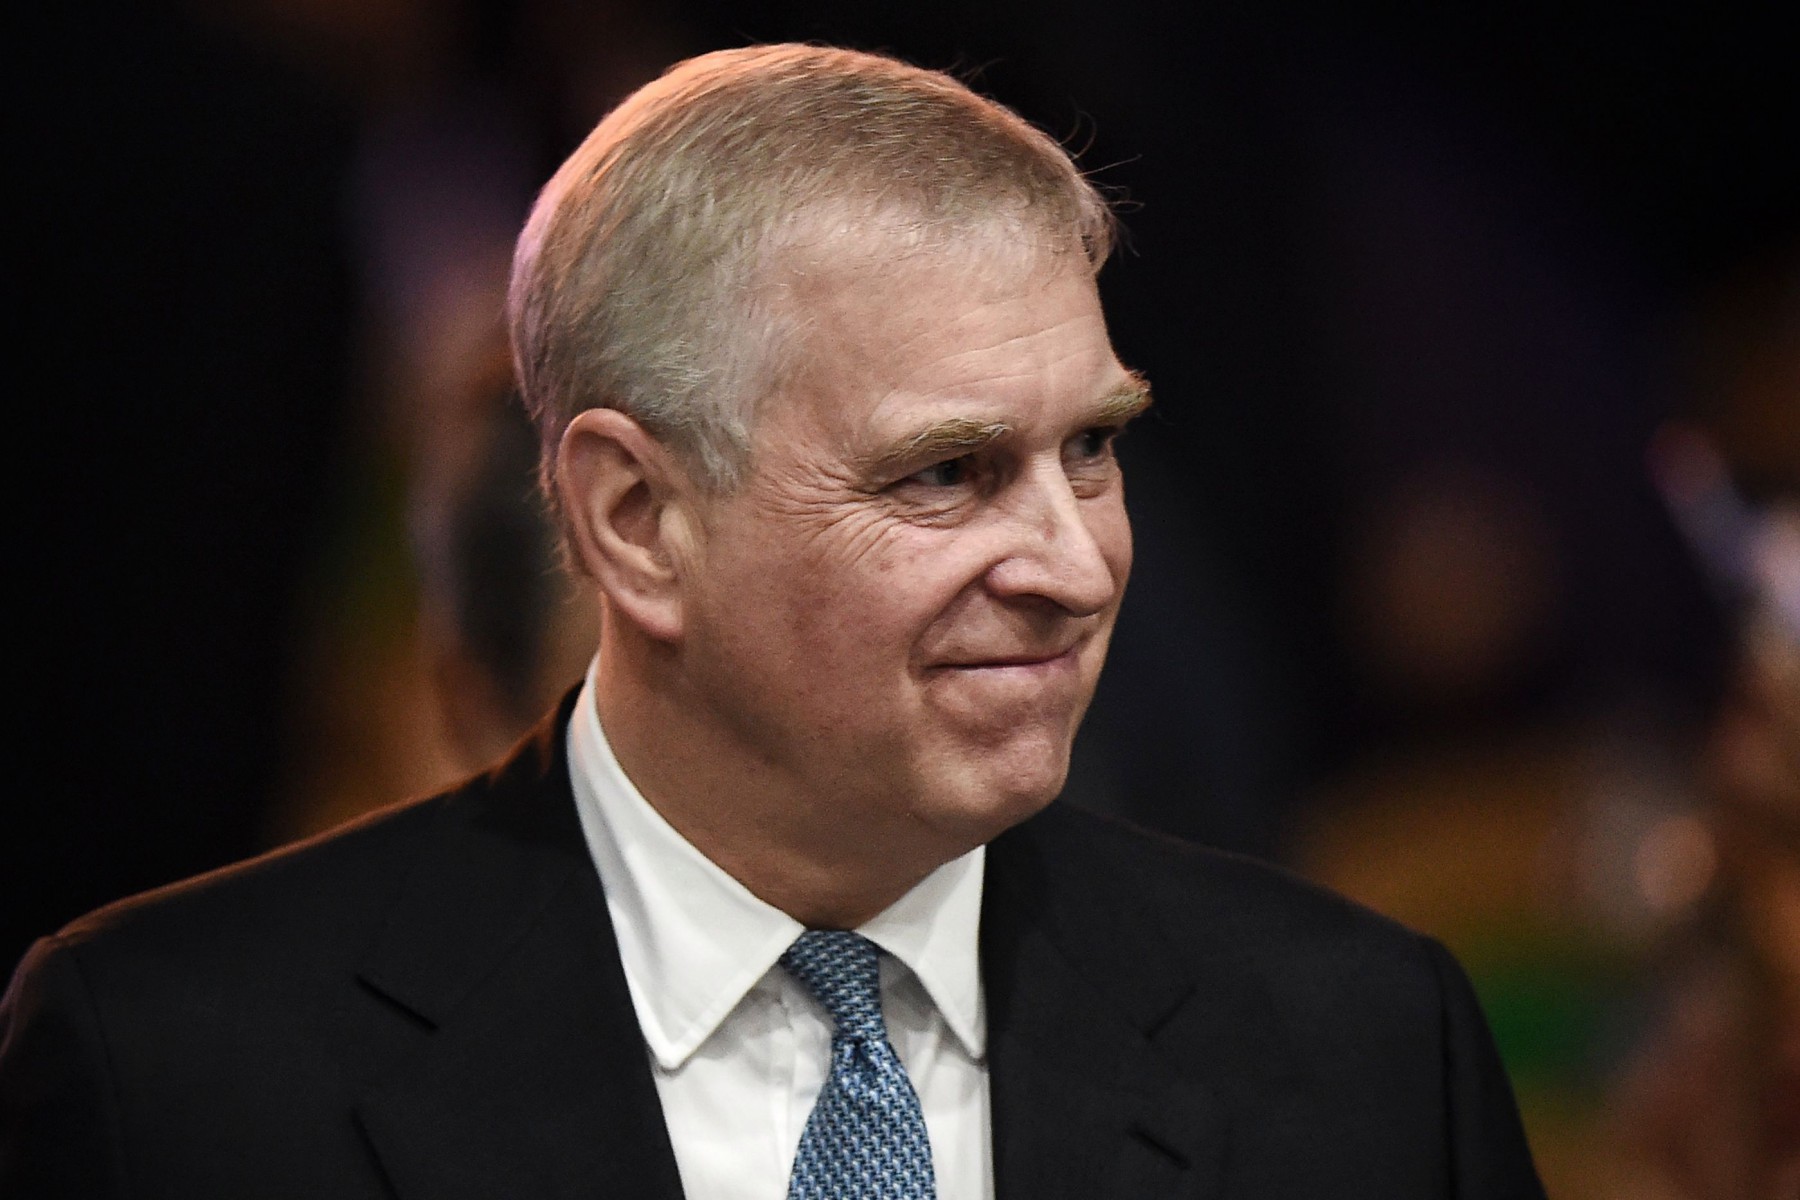 The scandal has led to the Duke of York quitting his royal duties